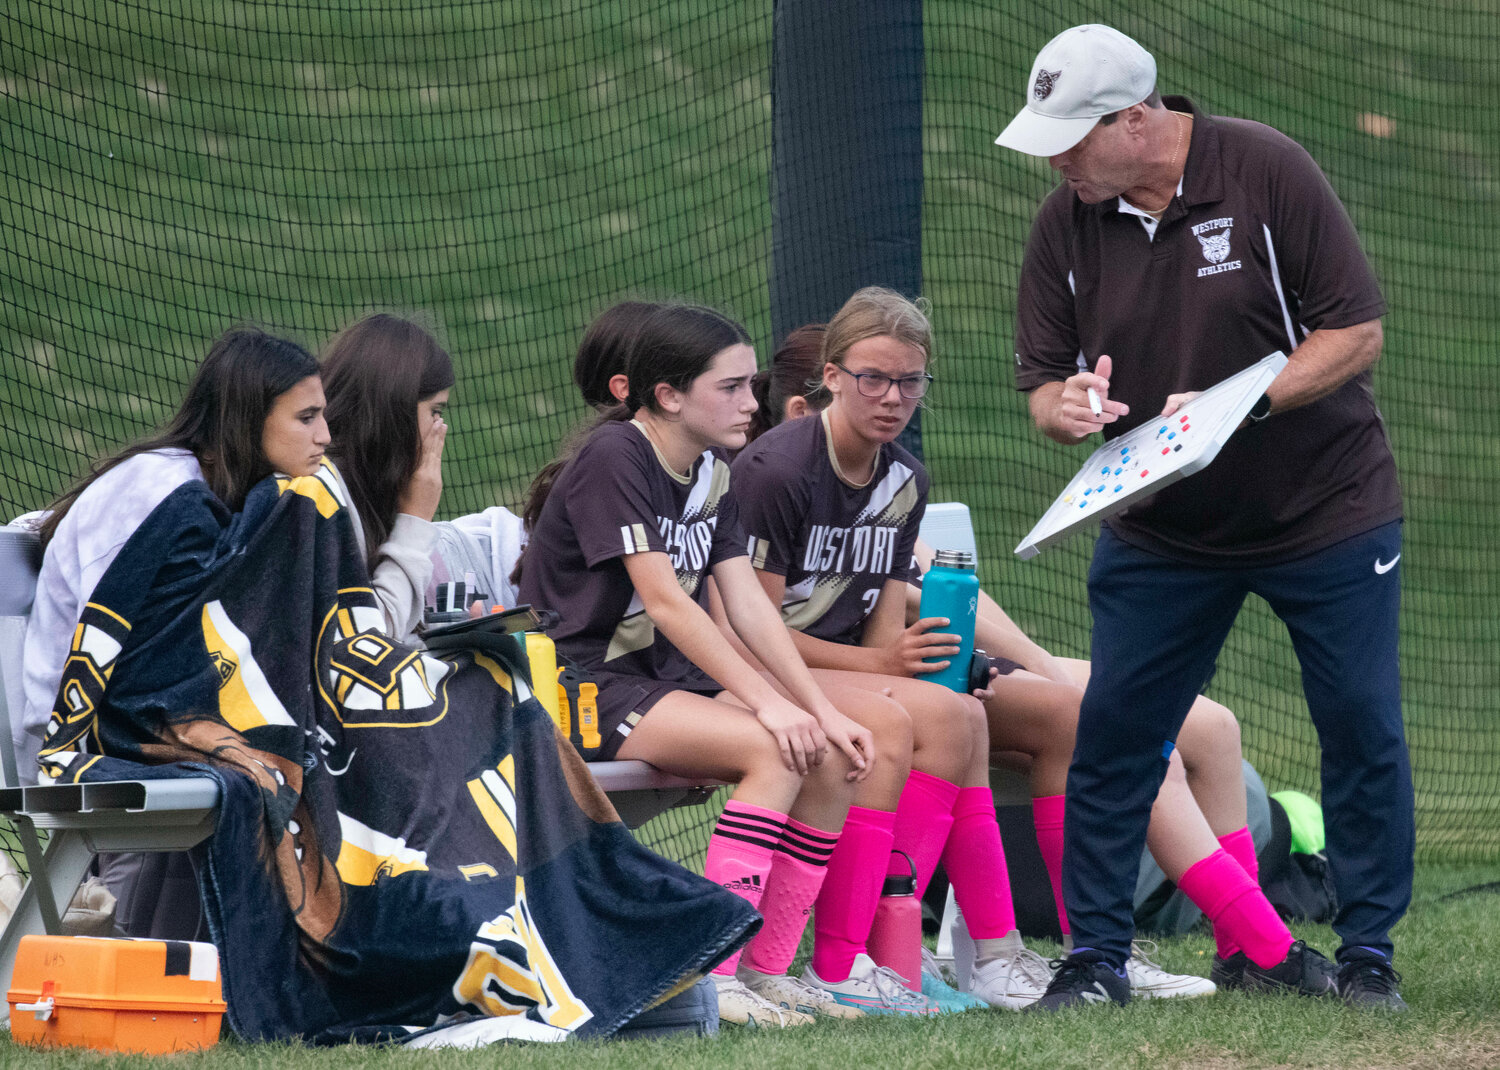 Head coach Gary Muello gives instruction to Sophia Nickelson (left).